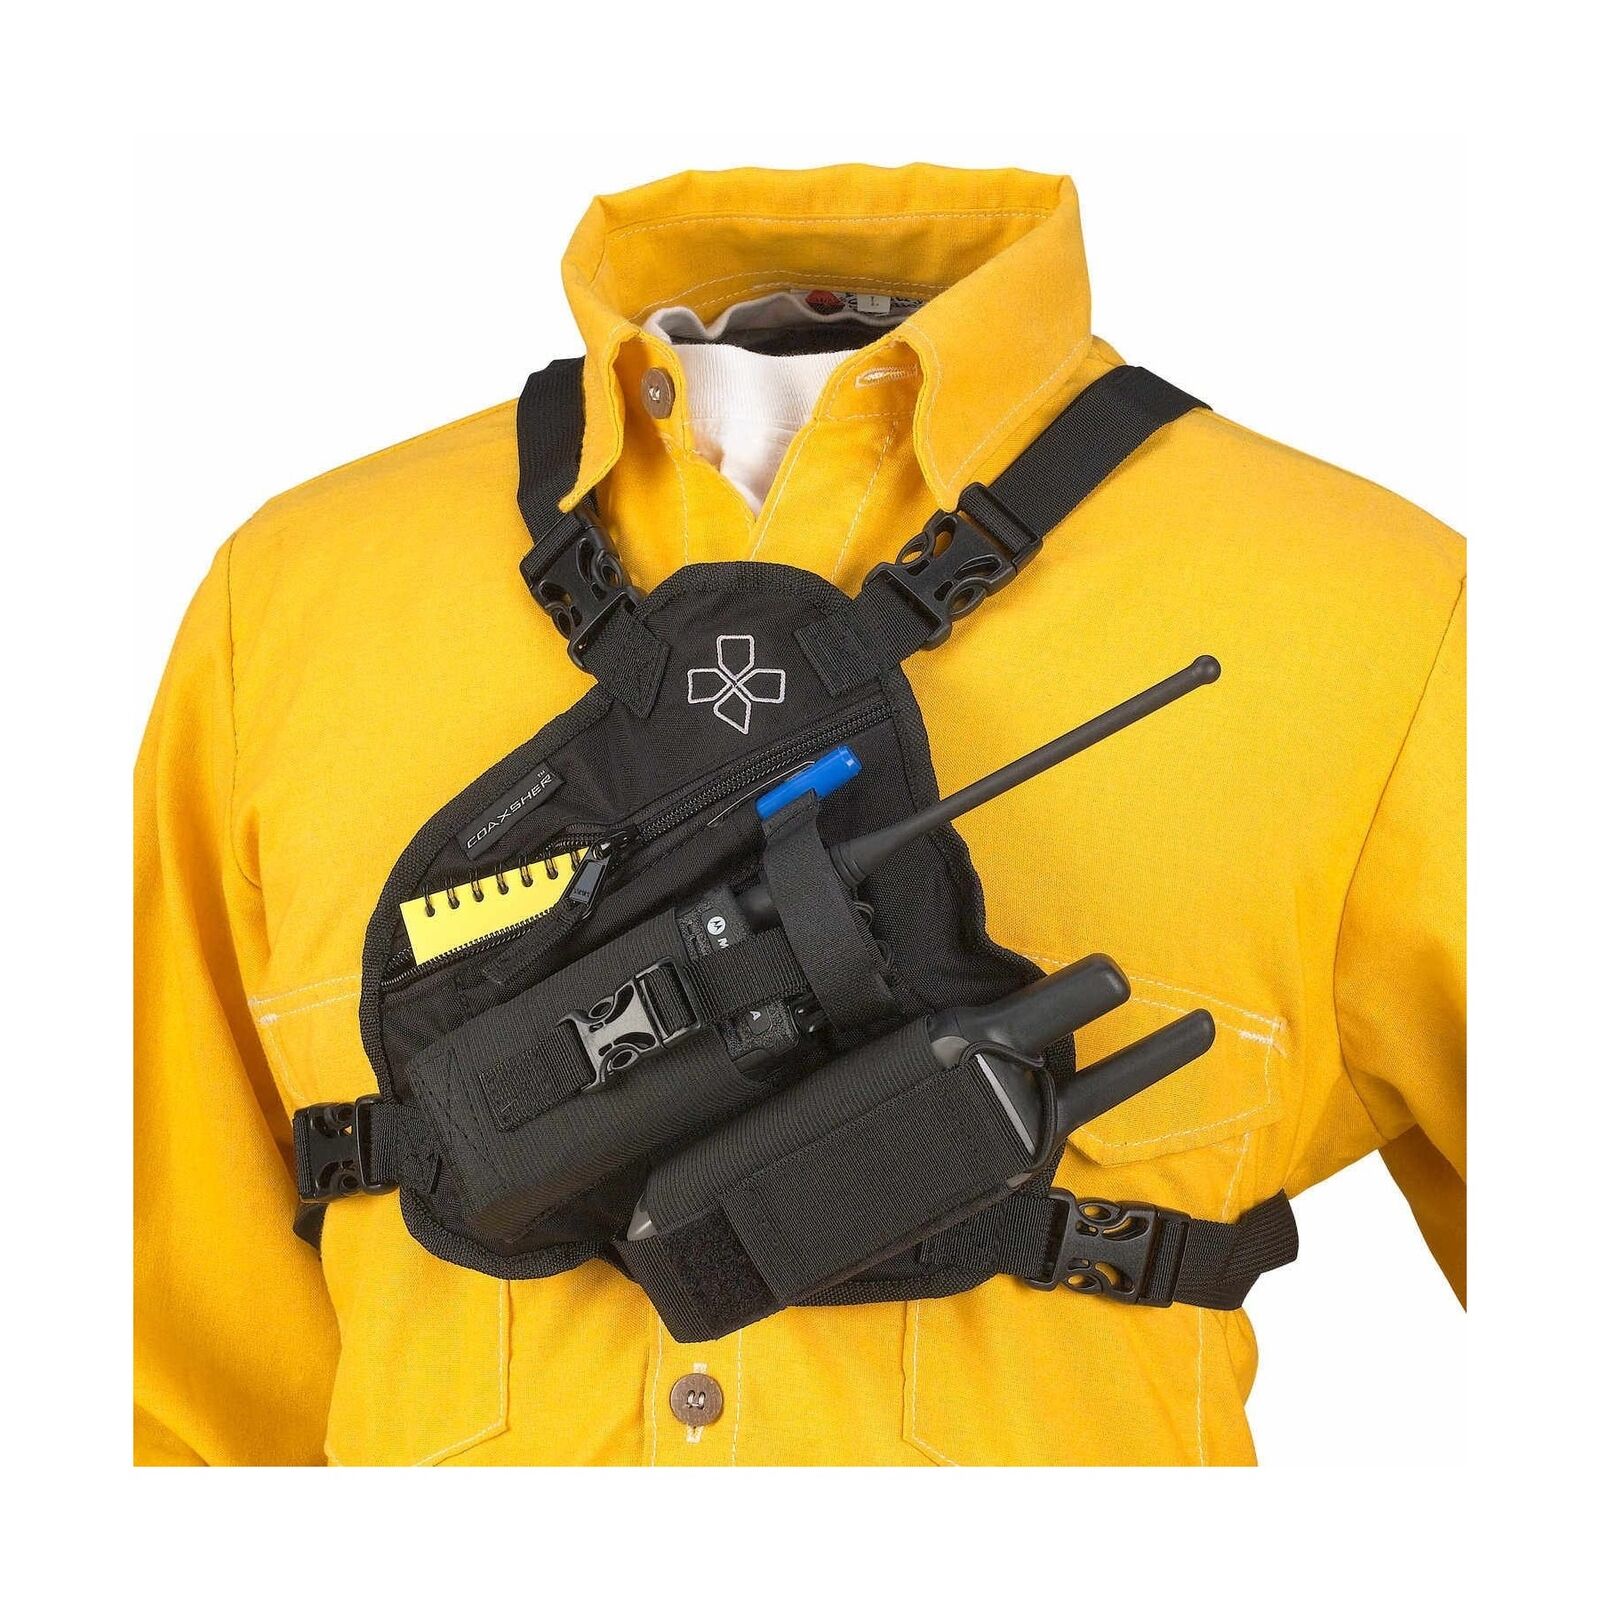 Coaxsher Rp203 Rp-1 Scout Radio Chest Harness for sale online | eBay